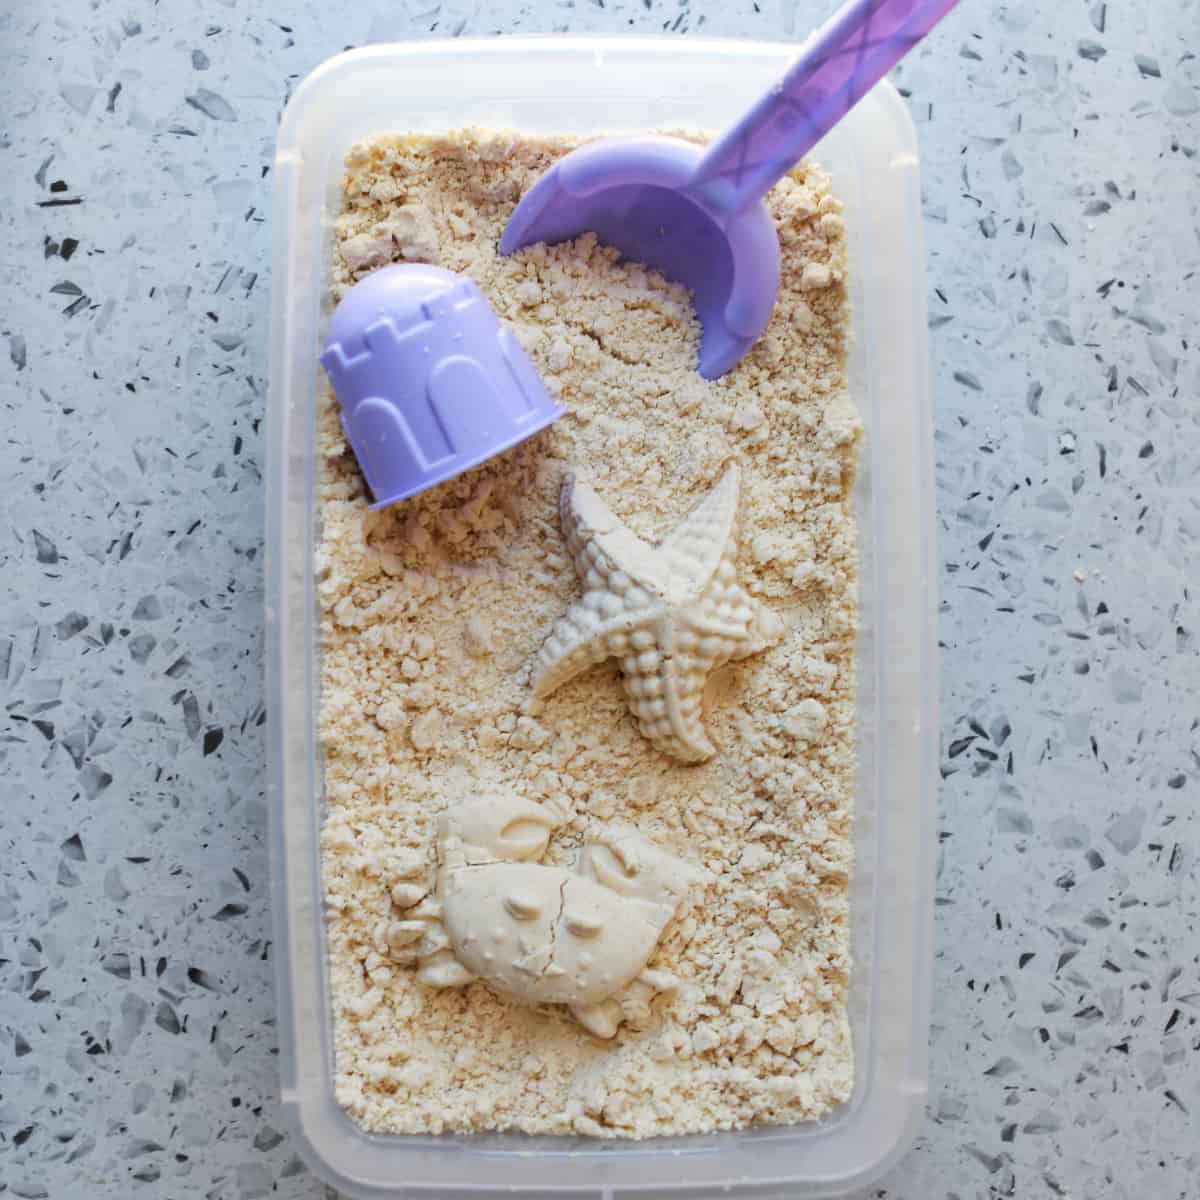 Container holding moon sand with crab and starfish shape and purple scooper. 